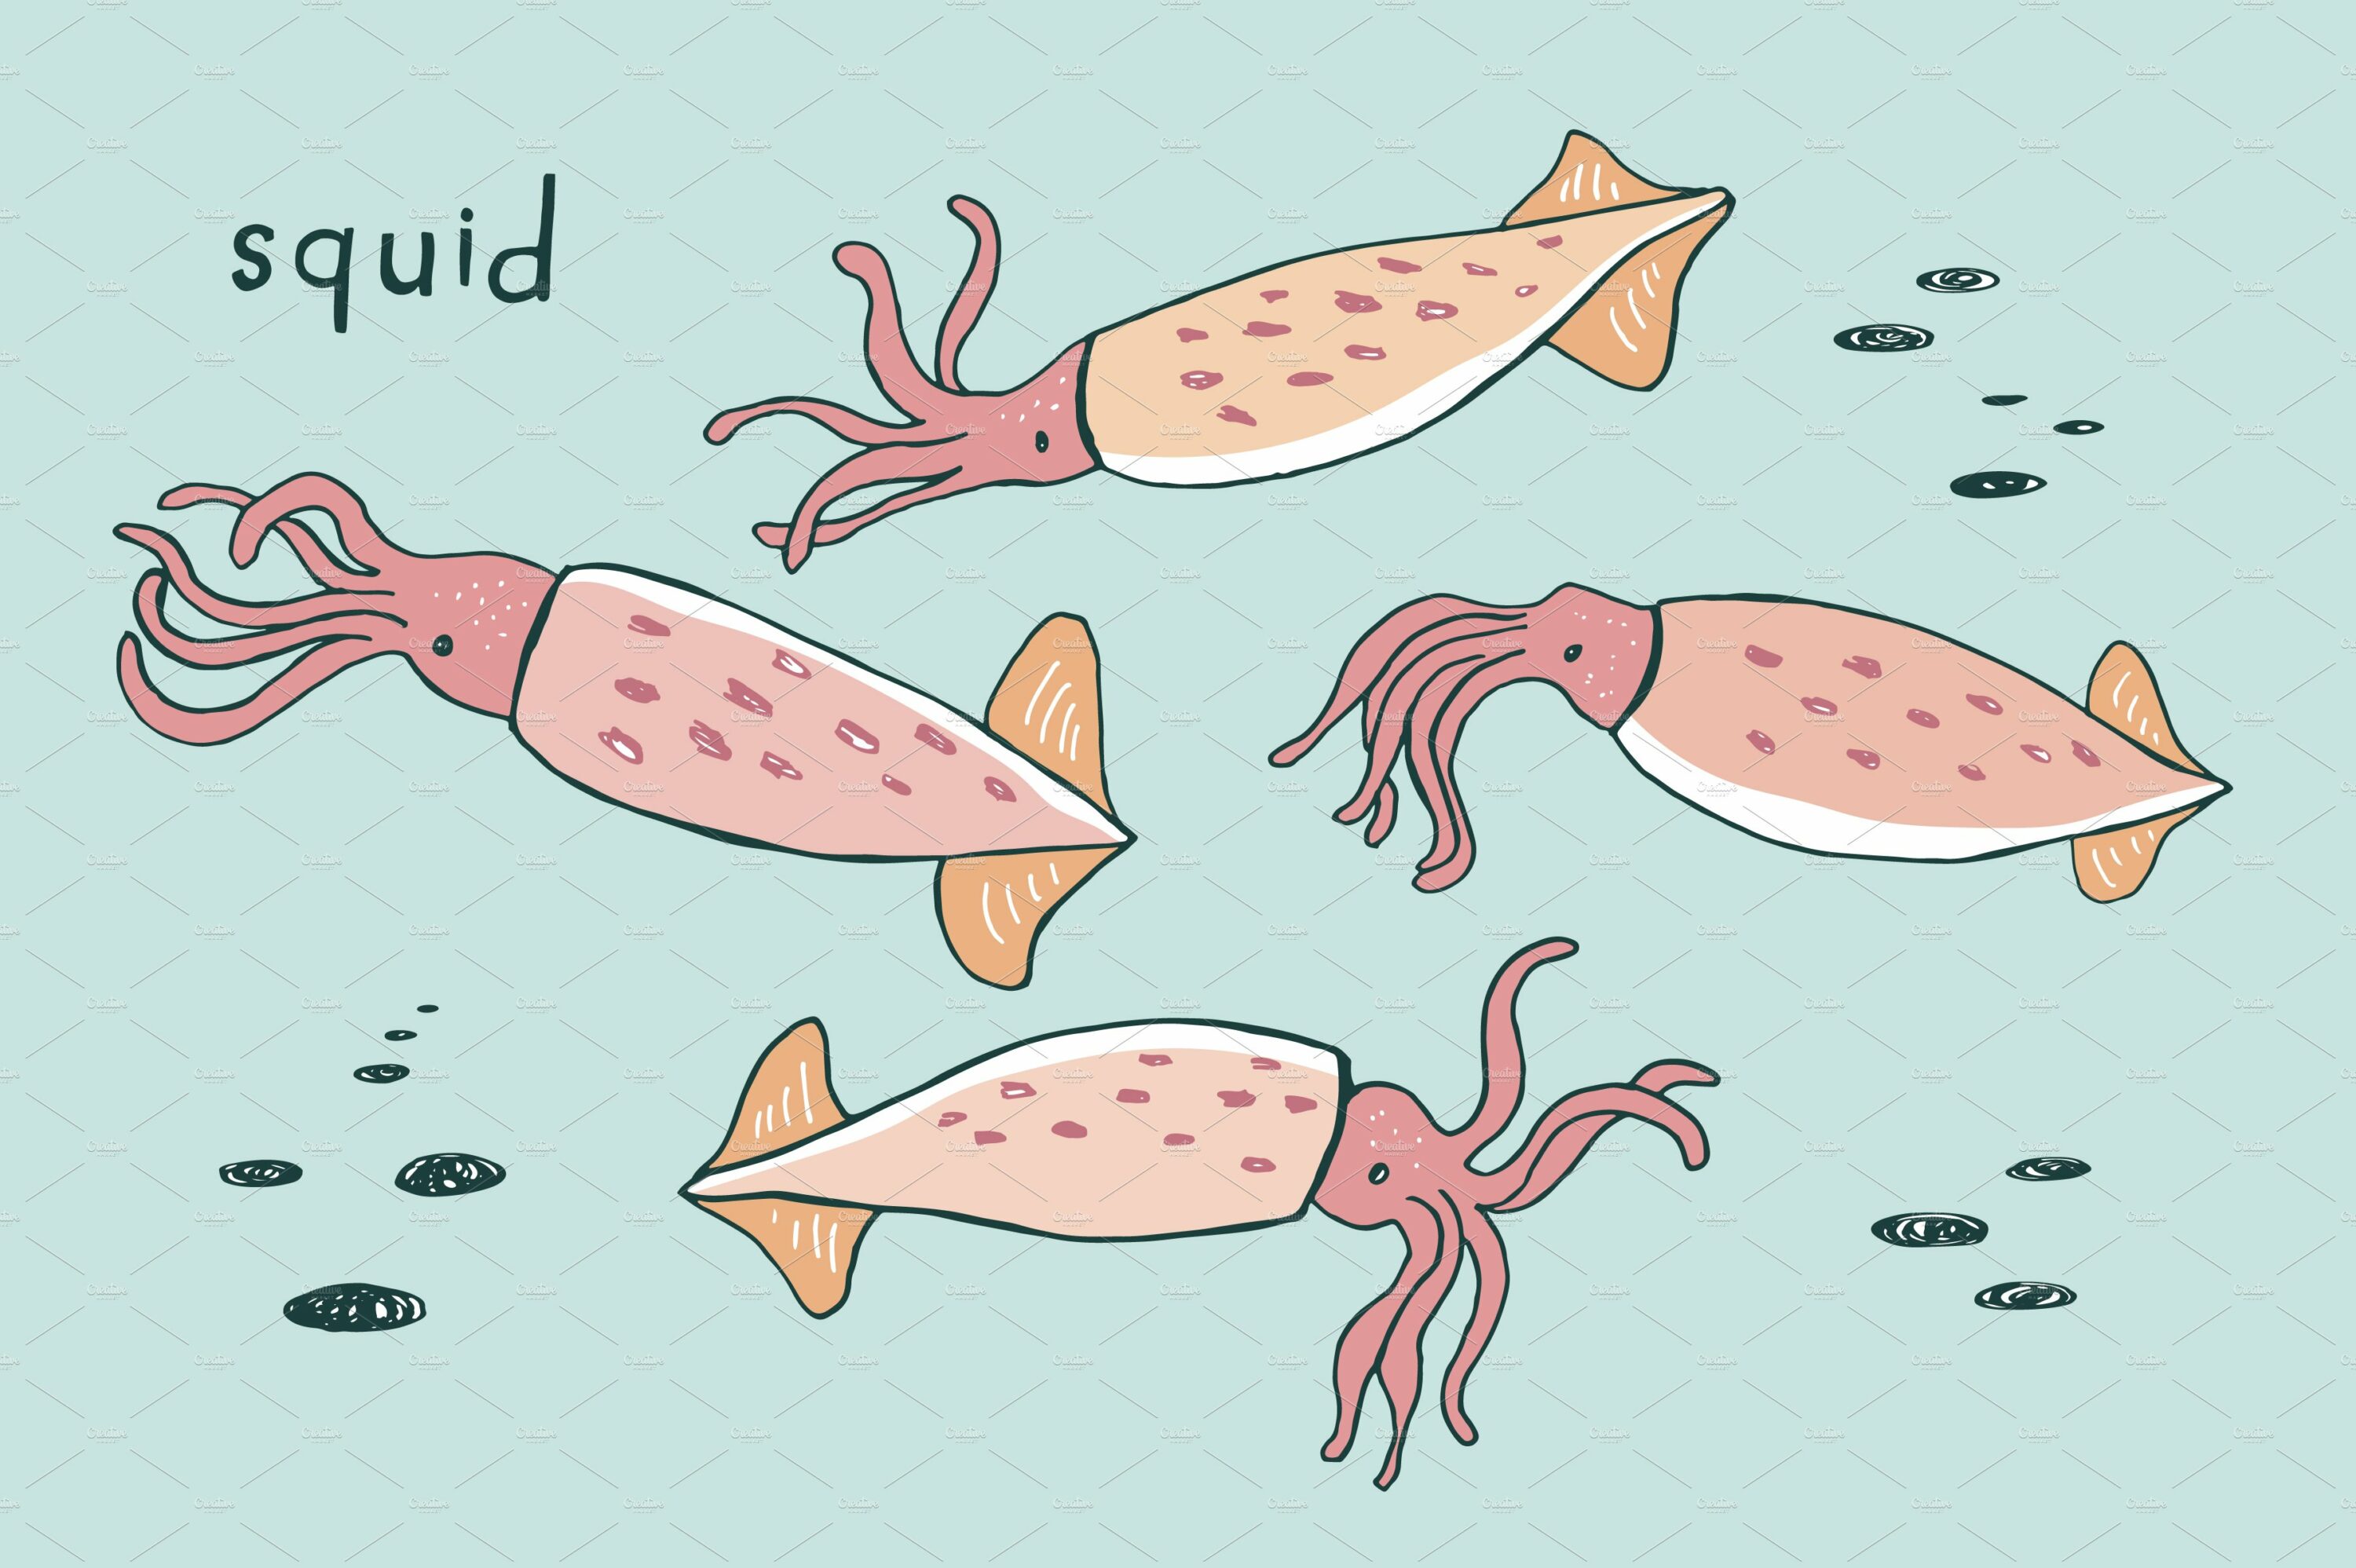 Light green background with light pink squids.